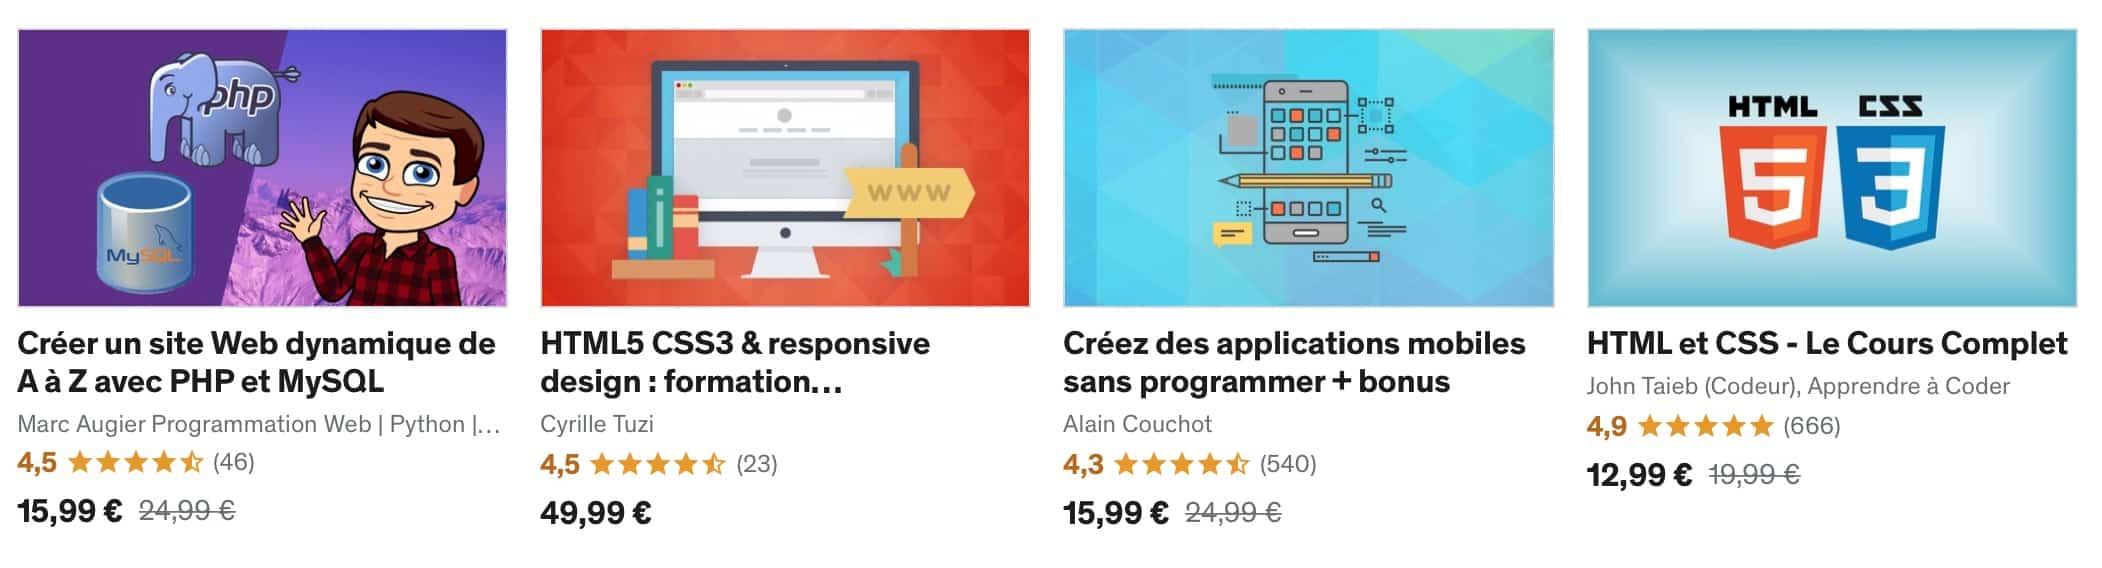 cours udemy